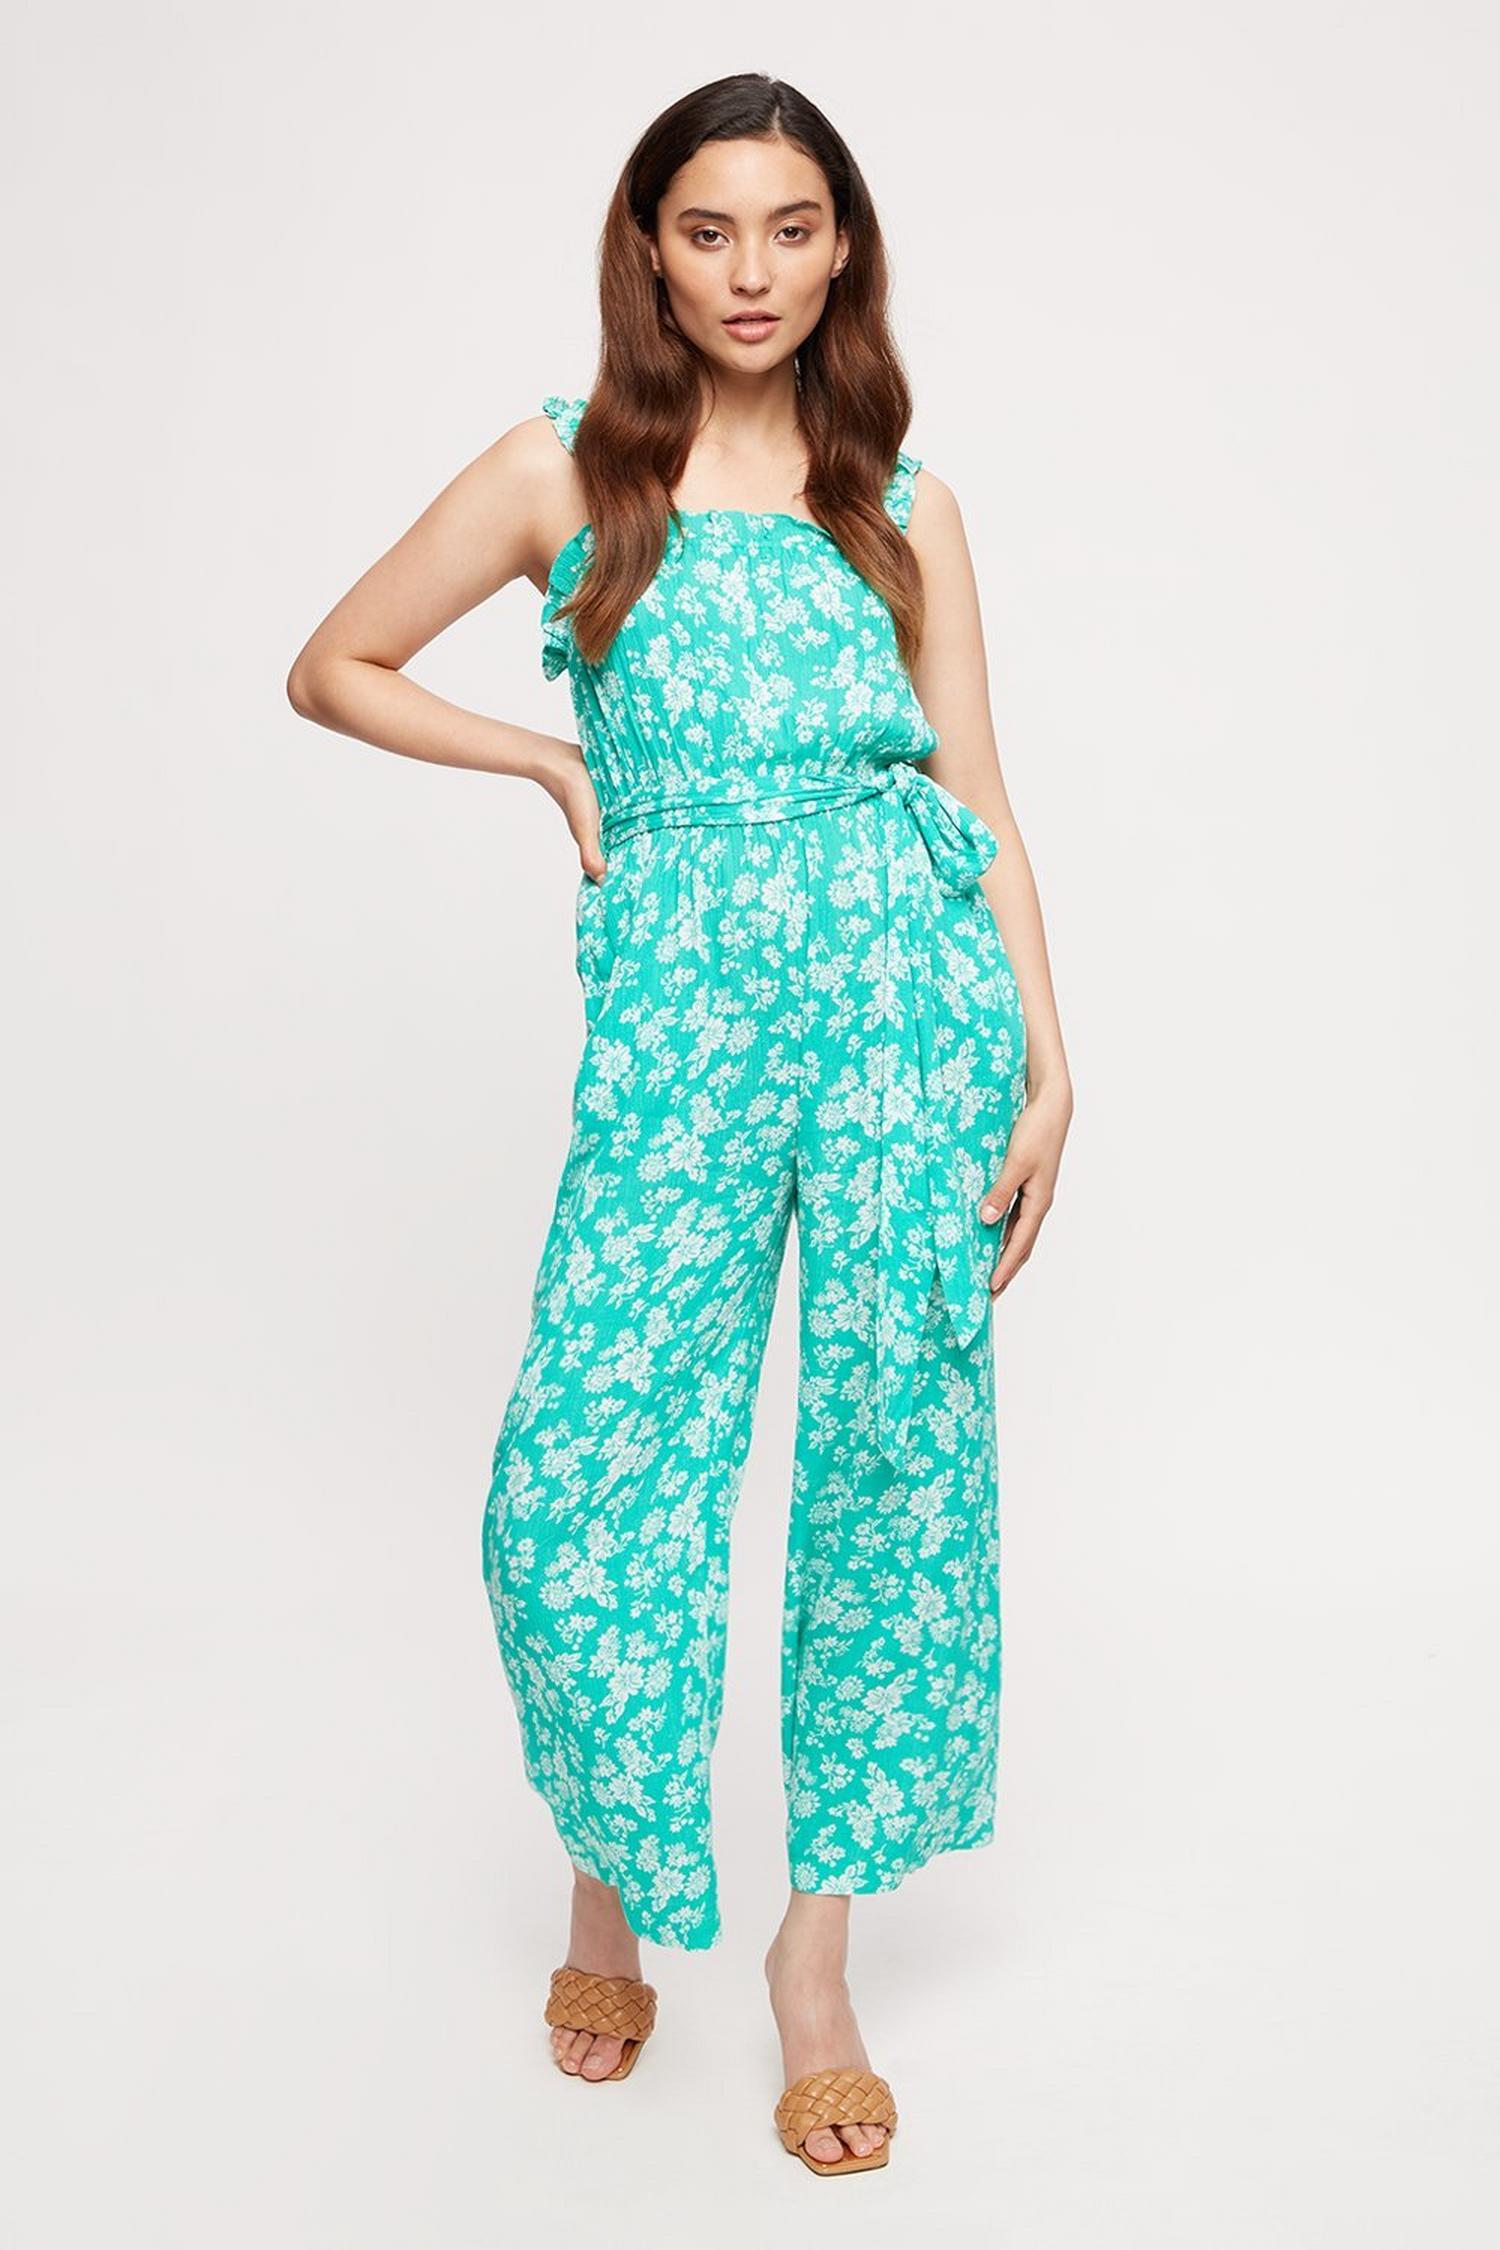 Petite Green And White Floral Jumpsuit | Dorothy Perkins UK